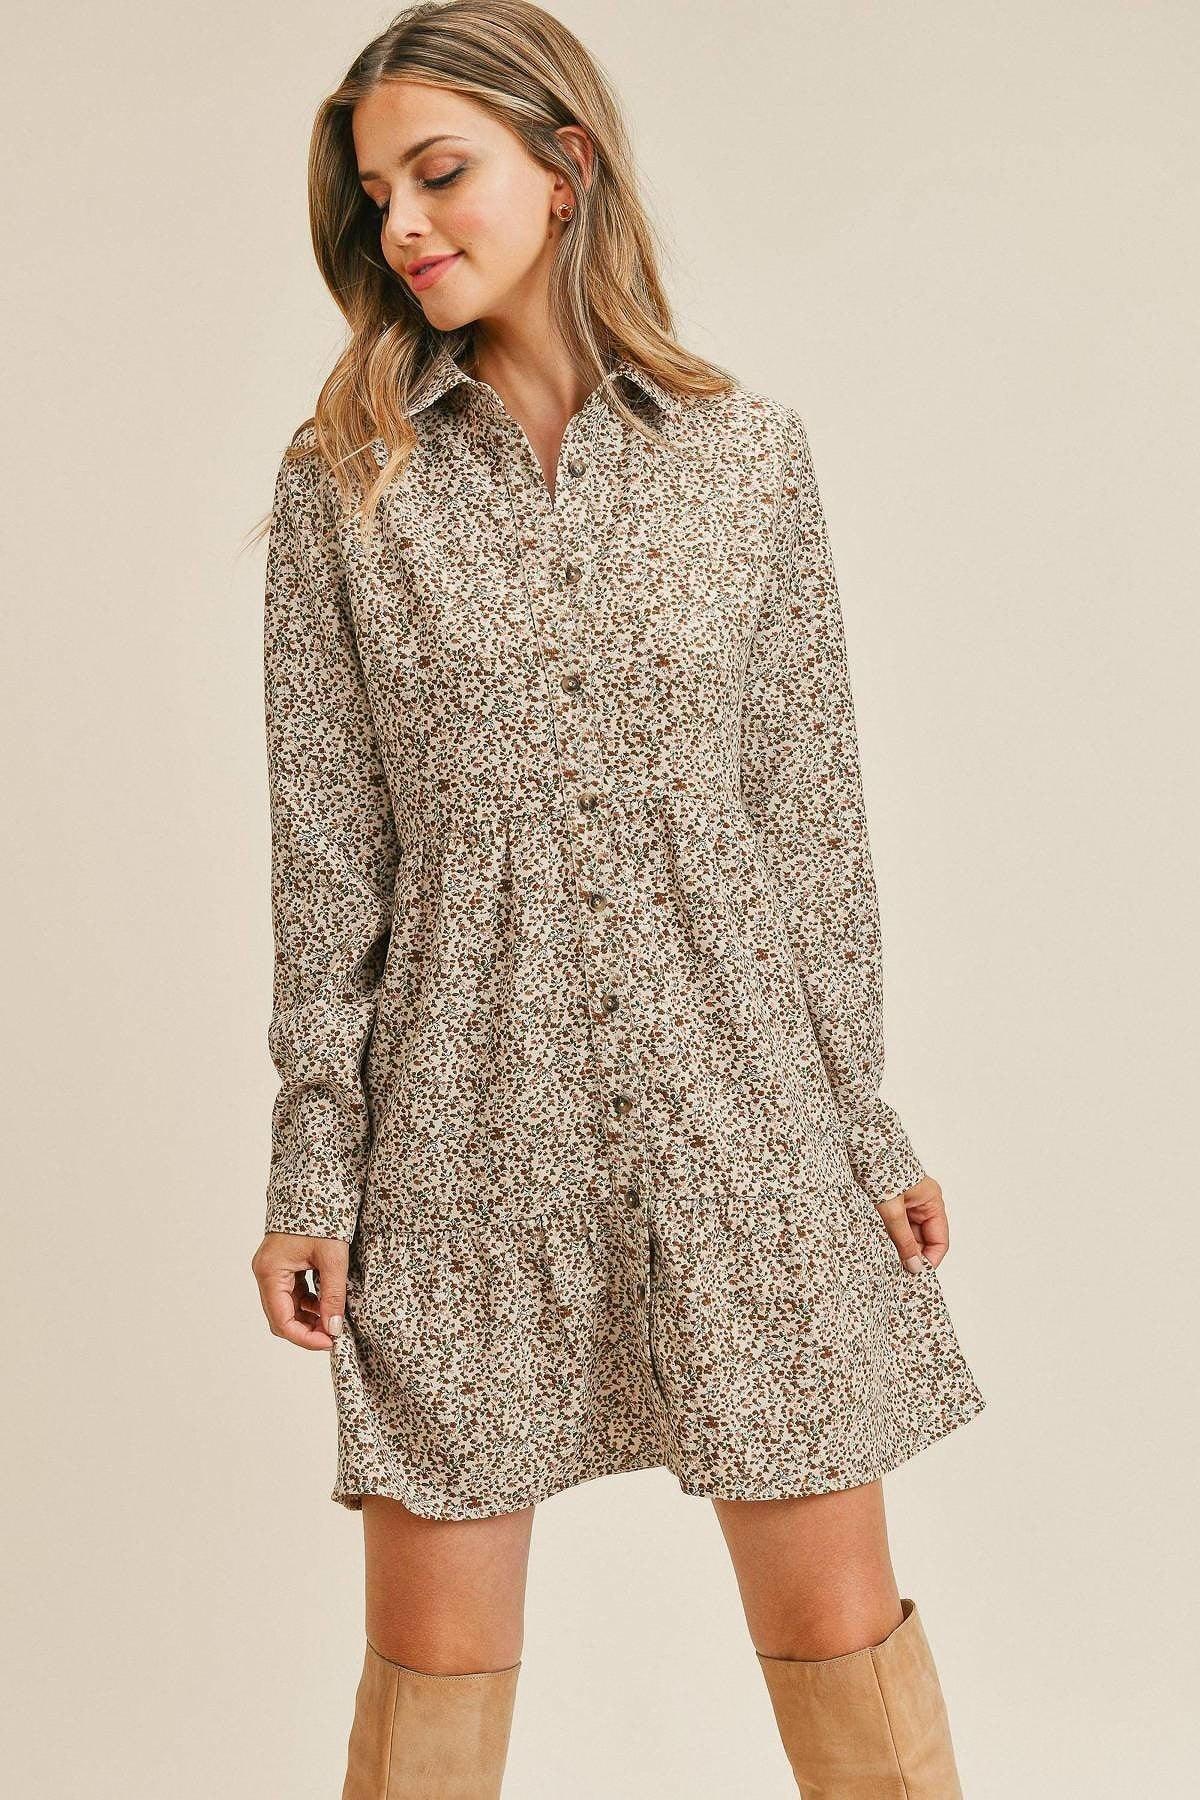 Corduroy Printed Button Down Front Collar Long Sleeve Dress Naughty Smile Fashion